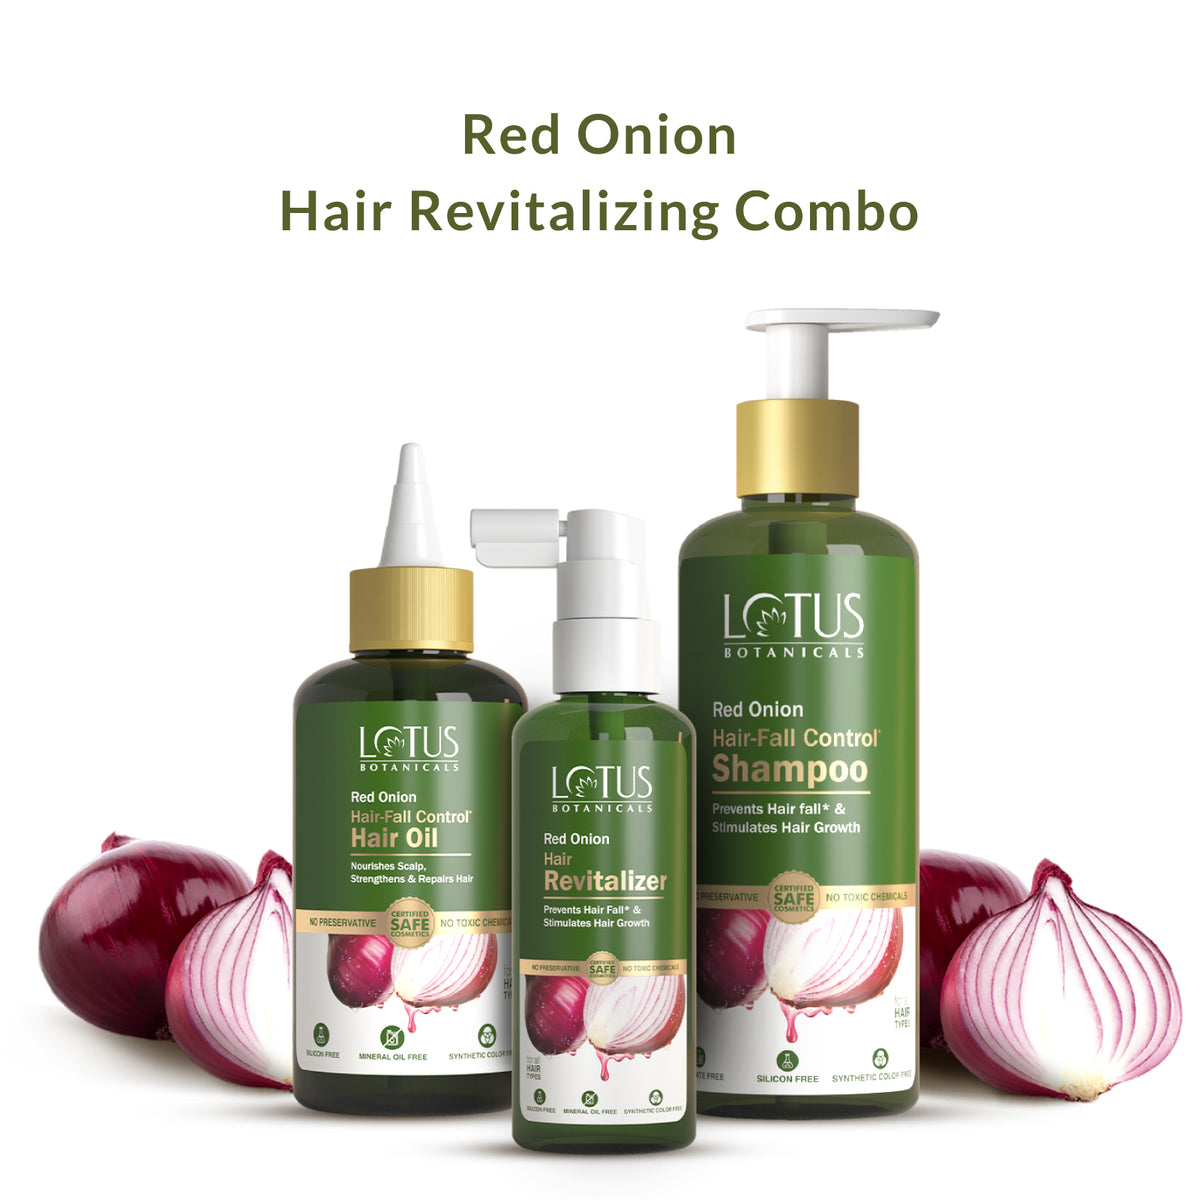 Red Onion Hair Revitalizing Combo - Natural solution for healthy and strong hair